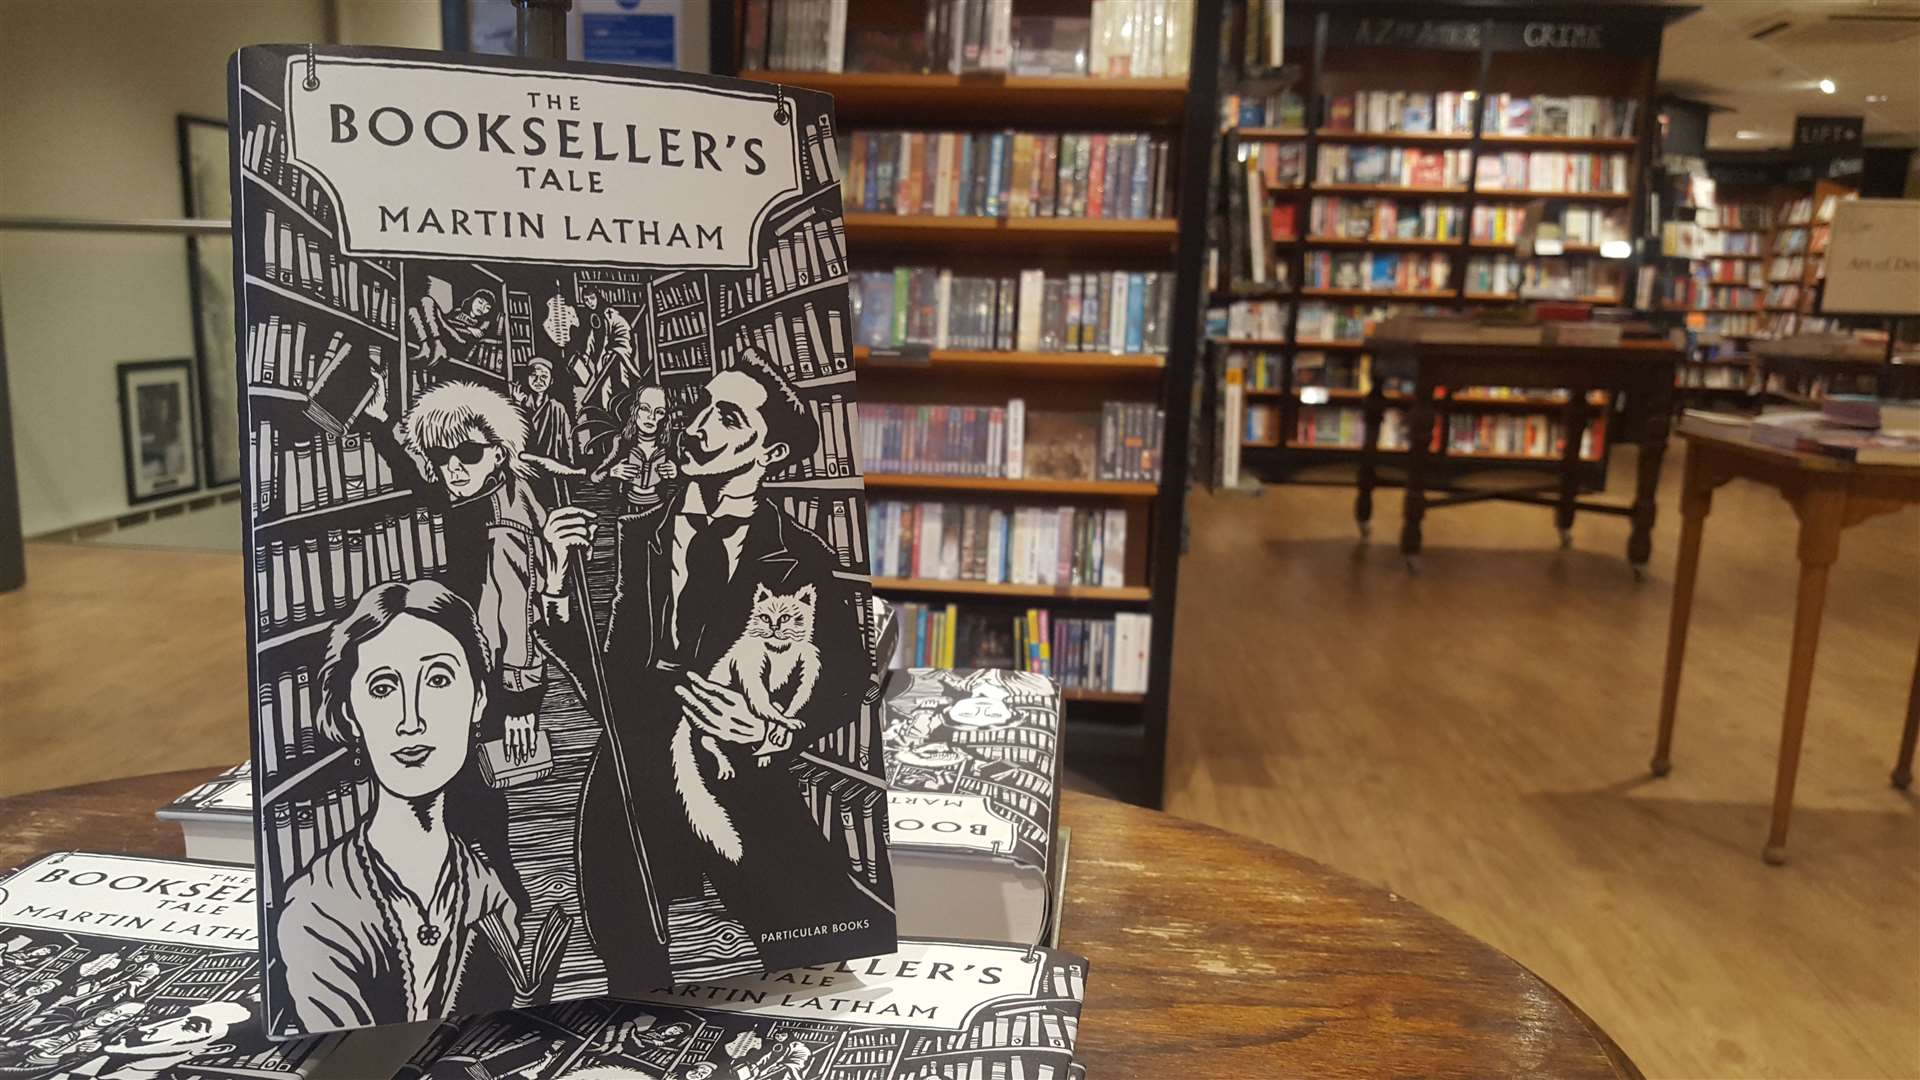 Martin Latham's new book naturally gets a showing in his own Waterstones branch